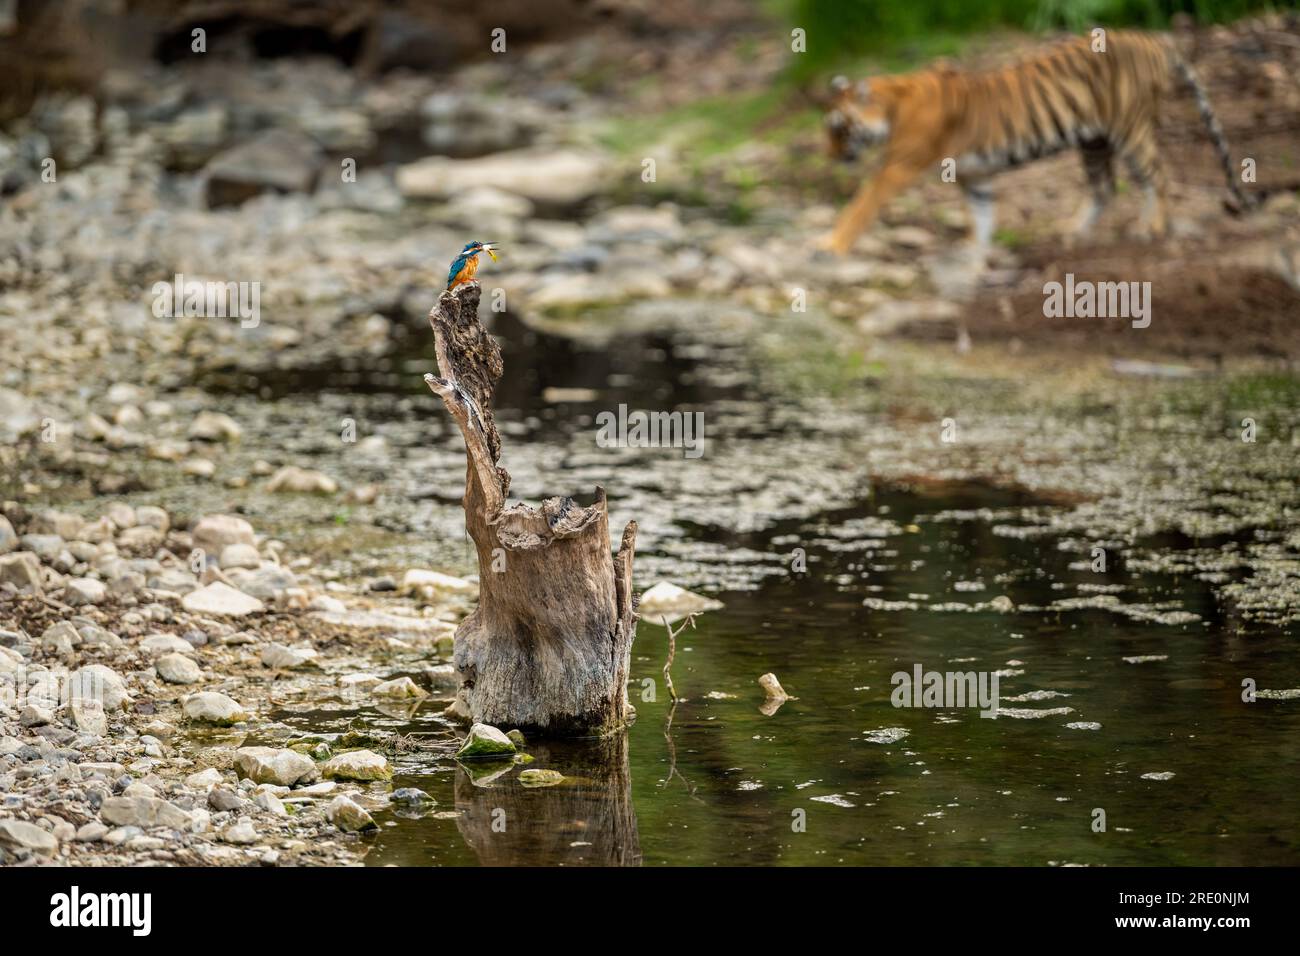 wild moment in forest common kingfisher or Alcedo atthis a colorful bird hunting small fish in his beak perched on tree trunk and tiger in background Stock Photo